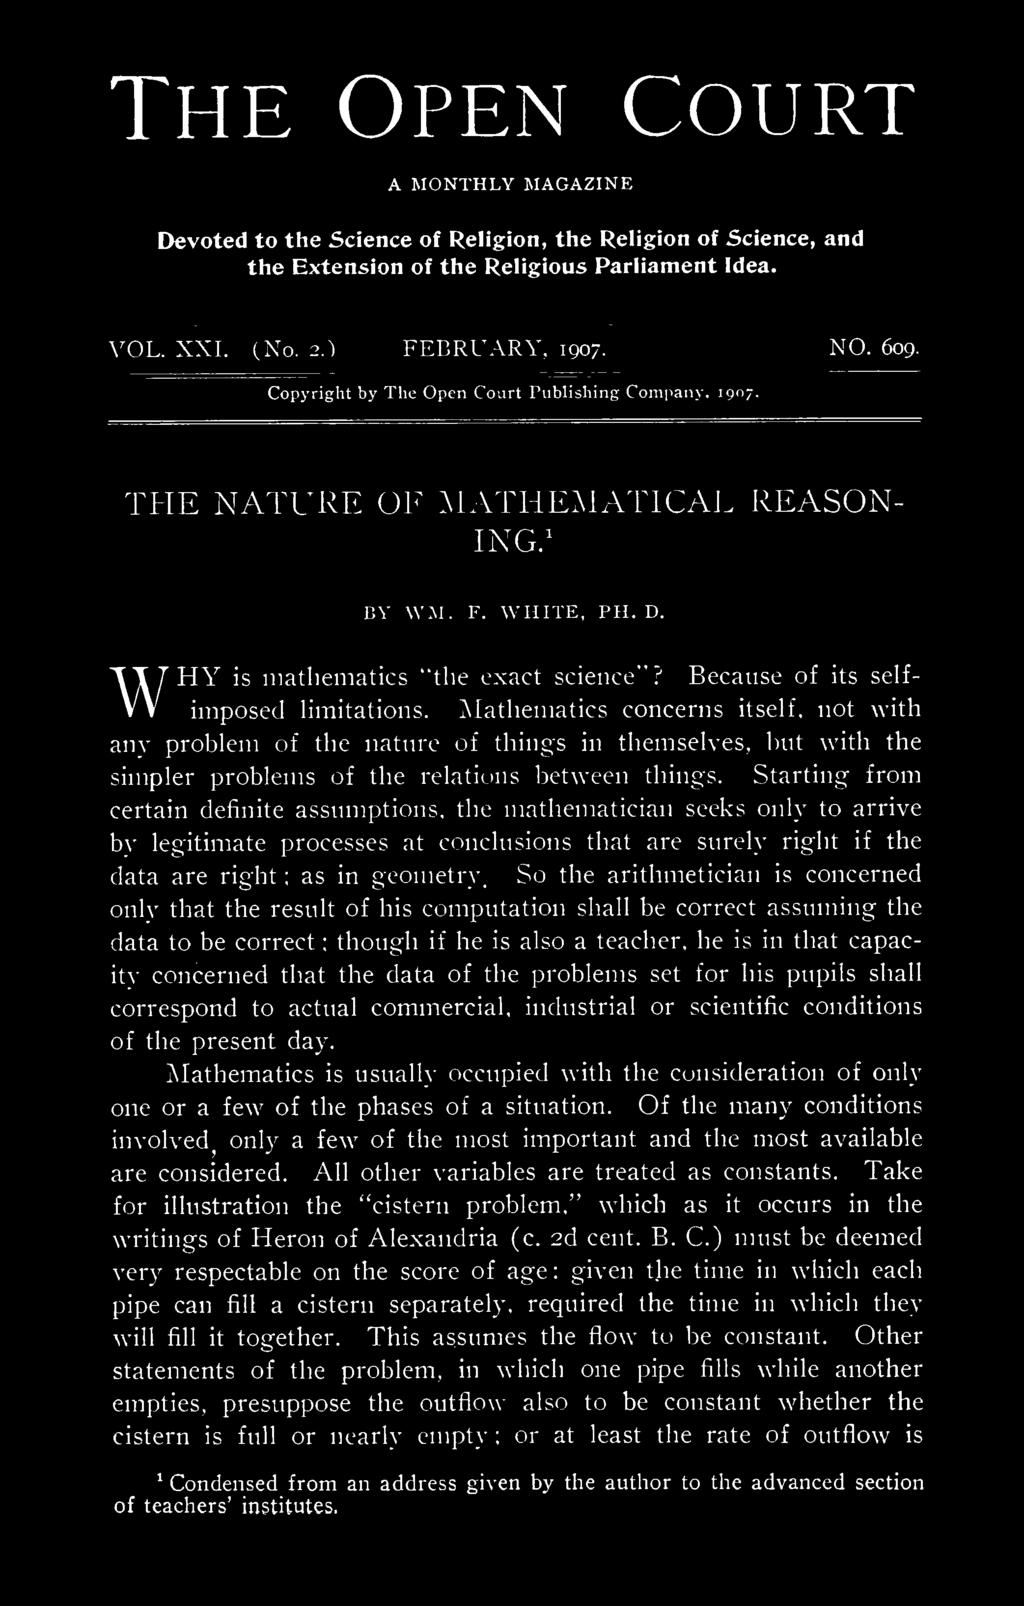 Mathematics concerns itself, not with any problem of the nature of things in themseu'es. but with the simpler problems of the relations between things.